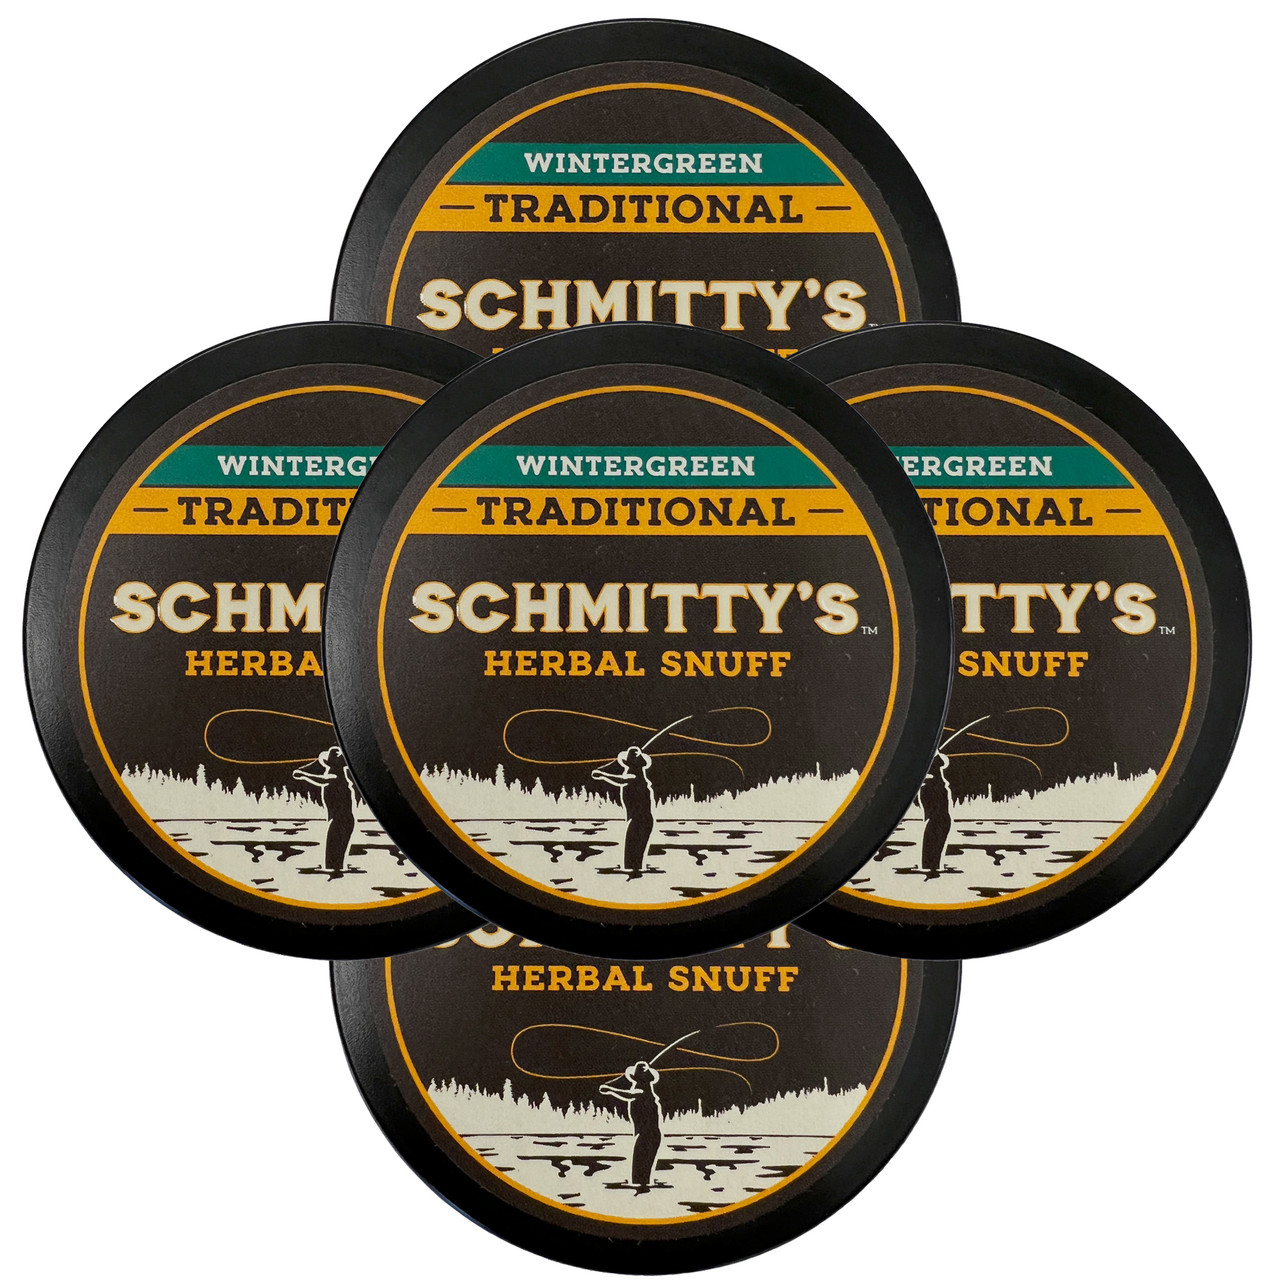 Schmitty's Herbal Snuff Wintergreen 5 Cans